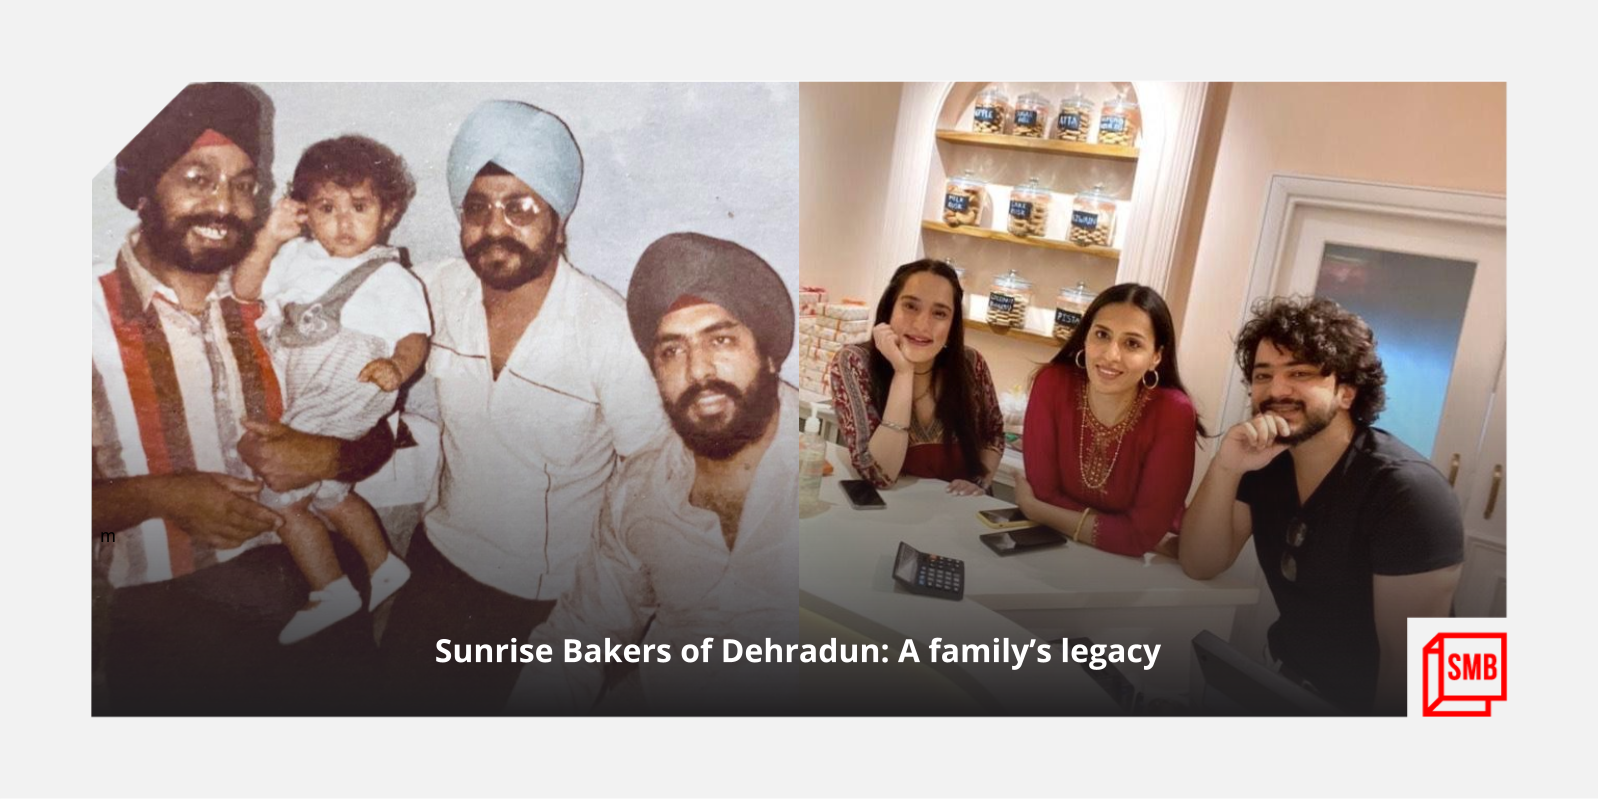 How family unity helped this six-decade-old bakery in Dehradun recover after a tragedy